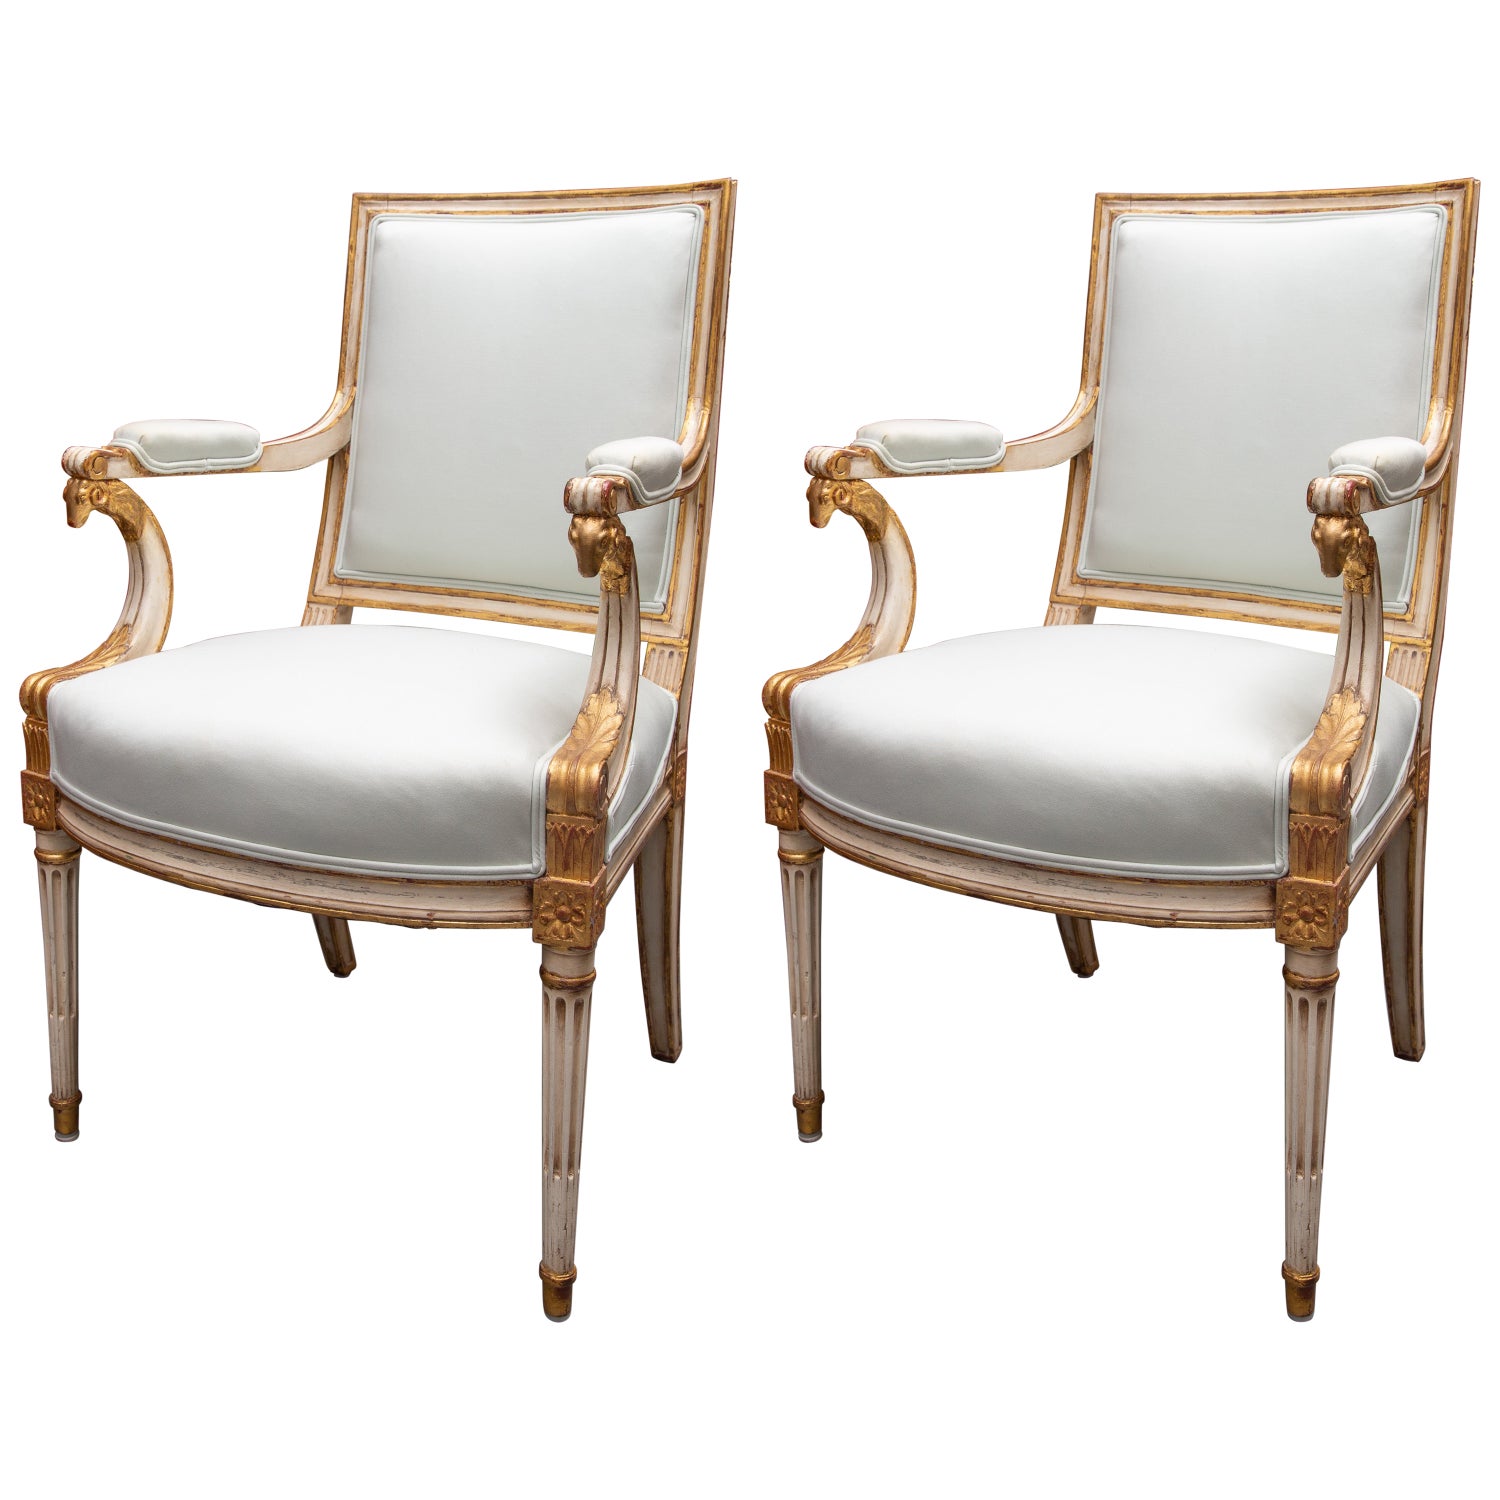 Pair of Painted and Parcel Gilt Empire Armchairs For Sale at 1stDibs